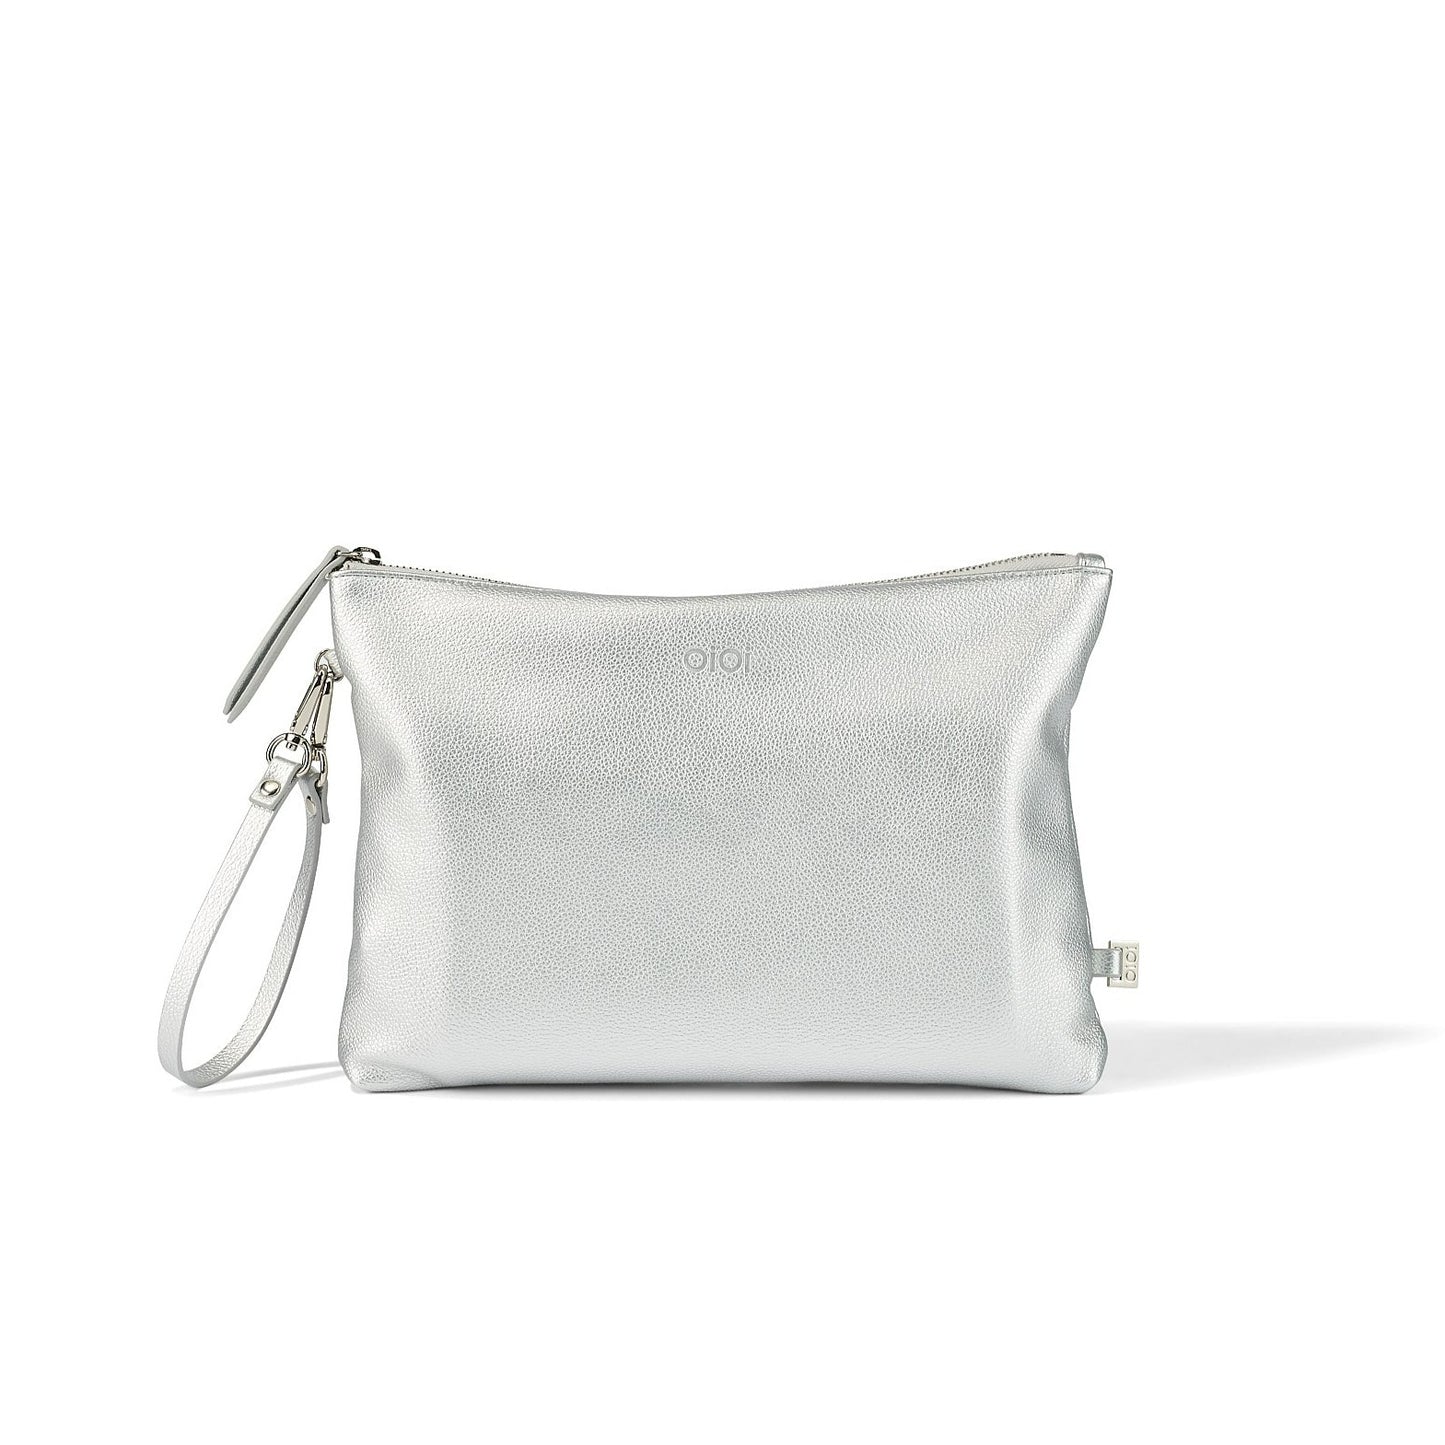 Diaper Changing Pouch - Metallic Silver Vegan Leather